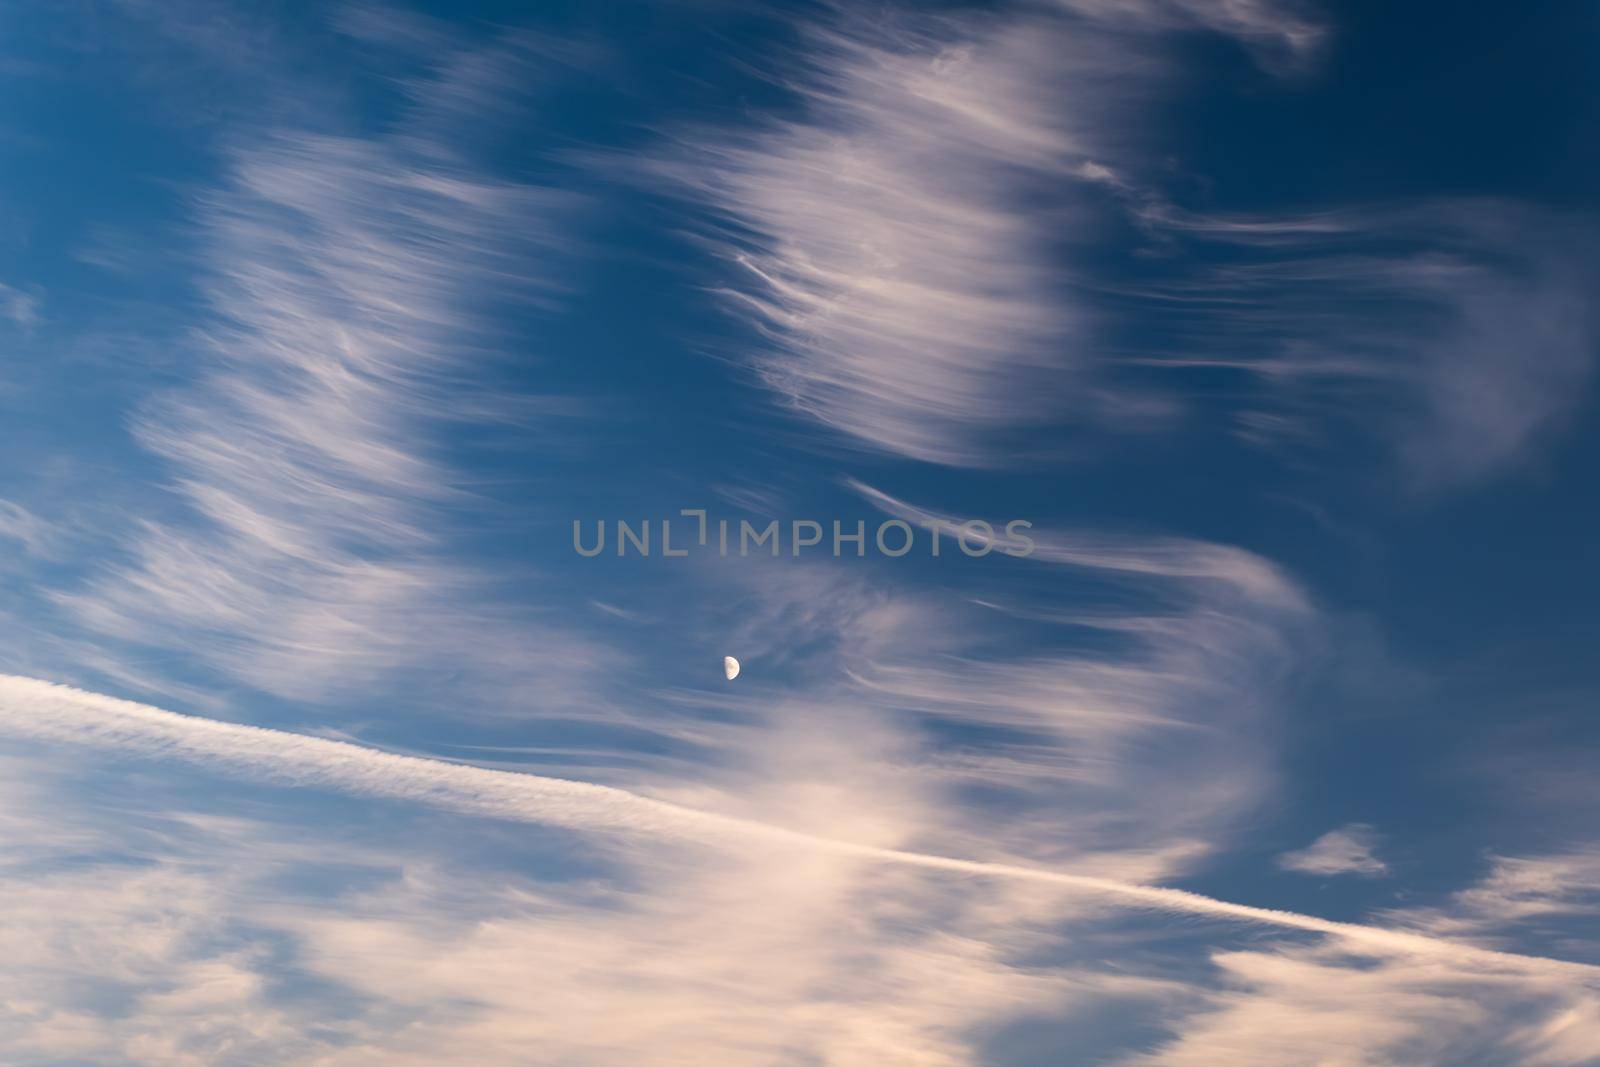 Cirrus clouds against a blue, dark blue sky, a small moon among the clouds. Airplane trail in the sky.